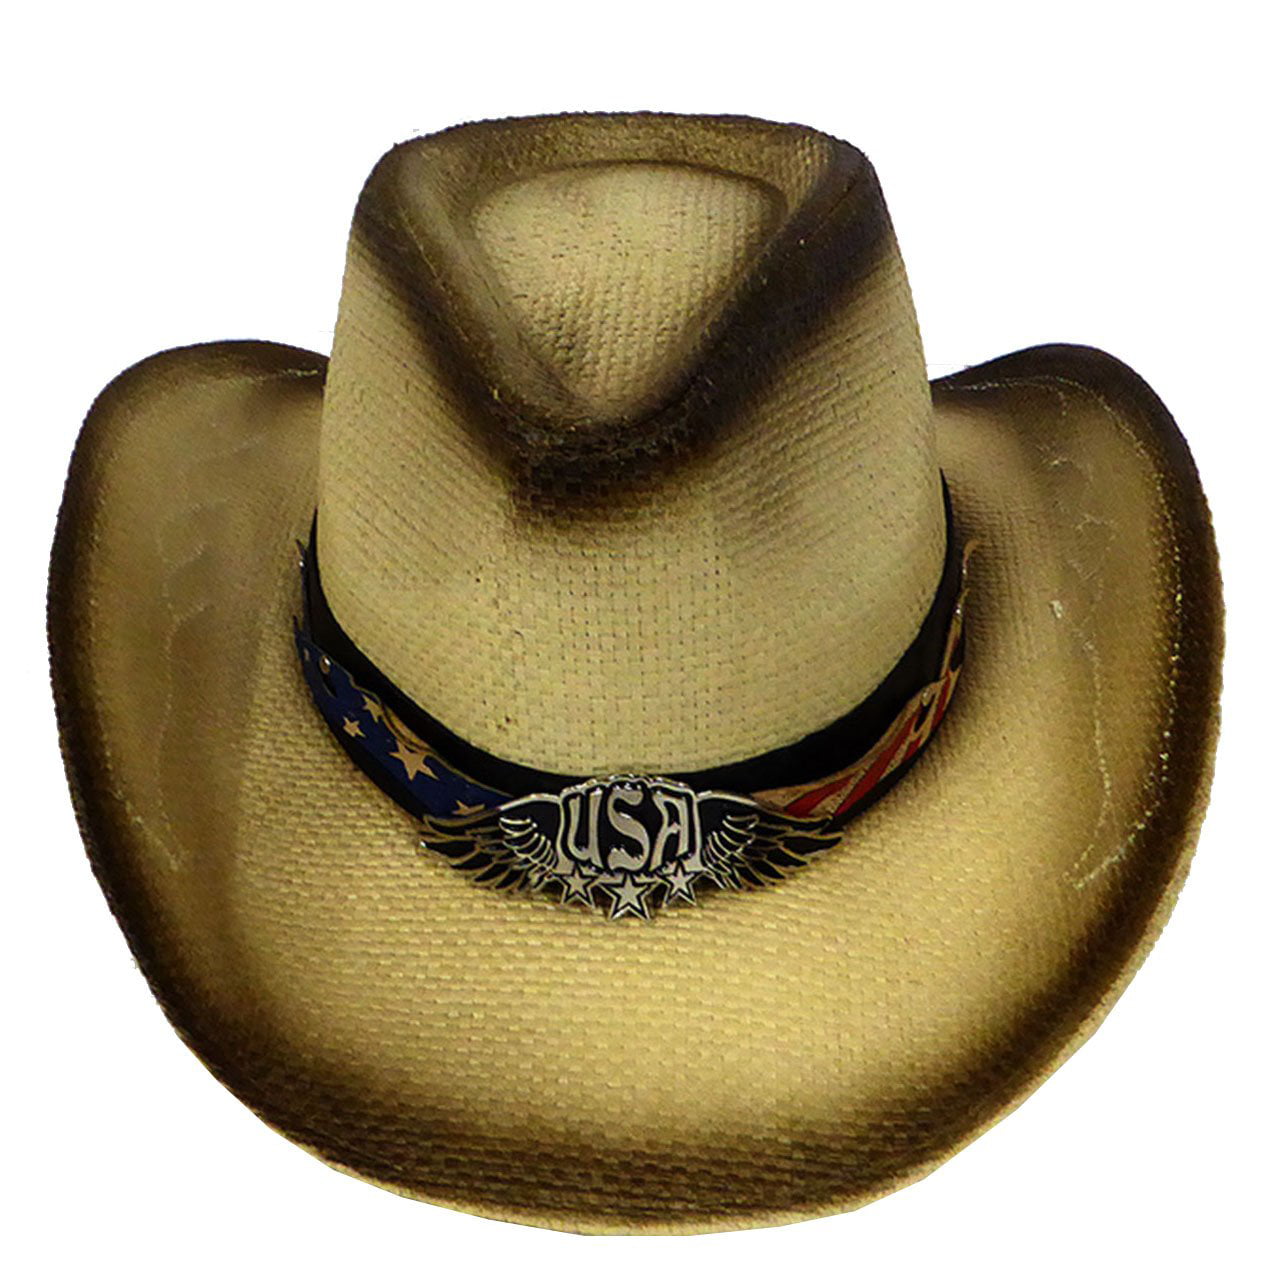 Distressed Western Cowboy Hat Cowgirl Country Western Adult Unisex